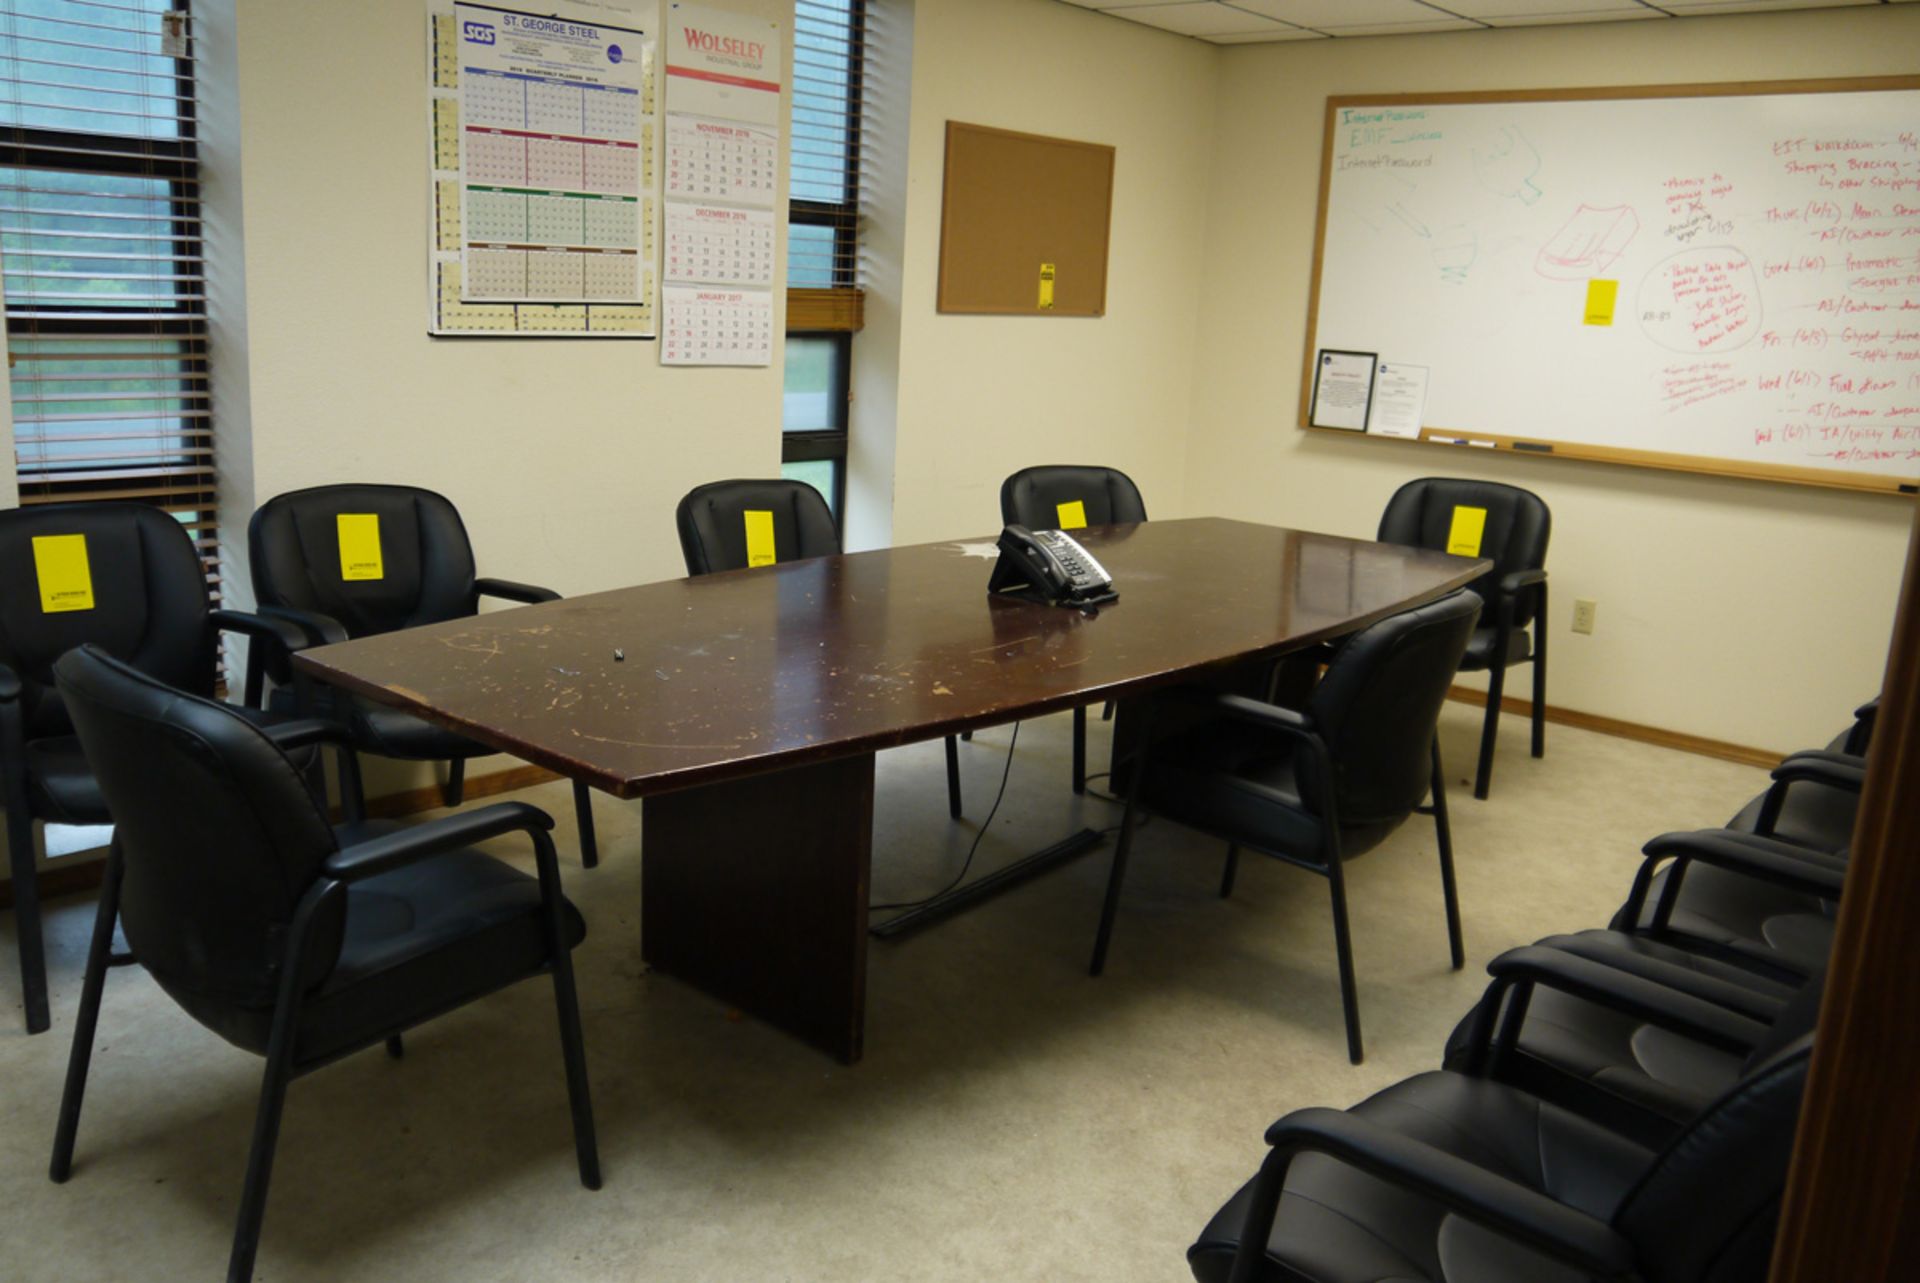 CONFERENCE ROOM TABLE WITH (15) CHAIRS, SUNCAST STORAGE CABINET, AND BUNN COFFEE POT WARMER